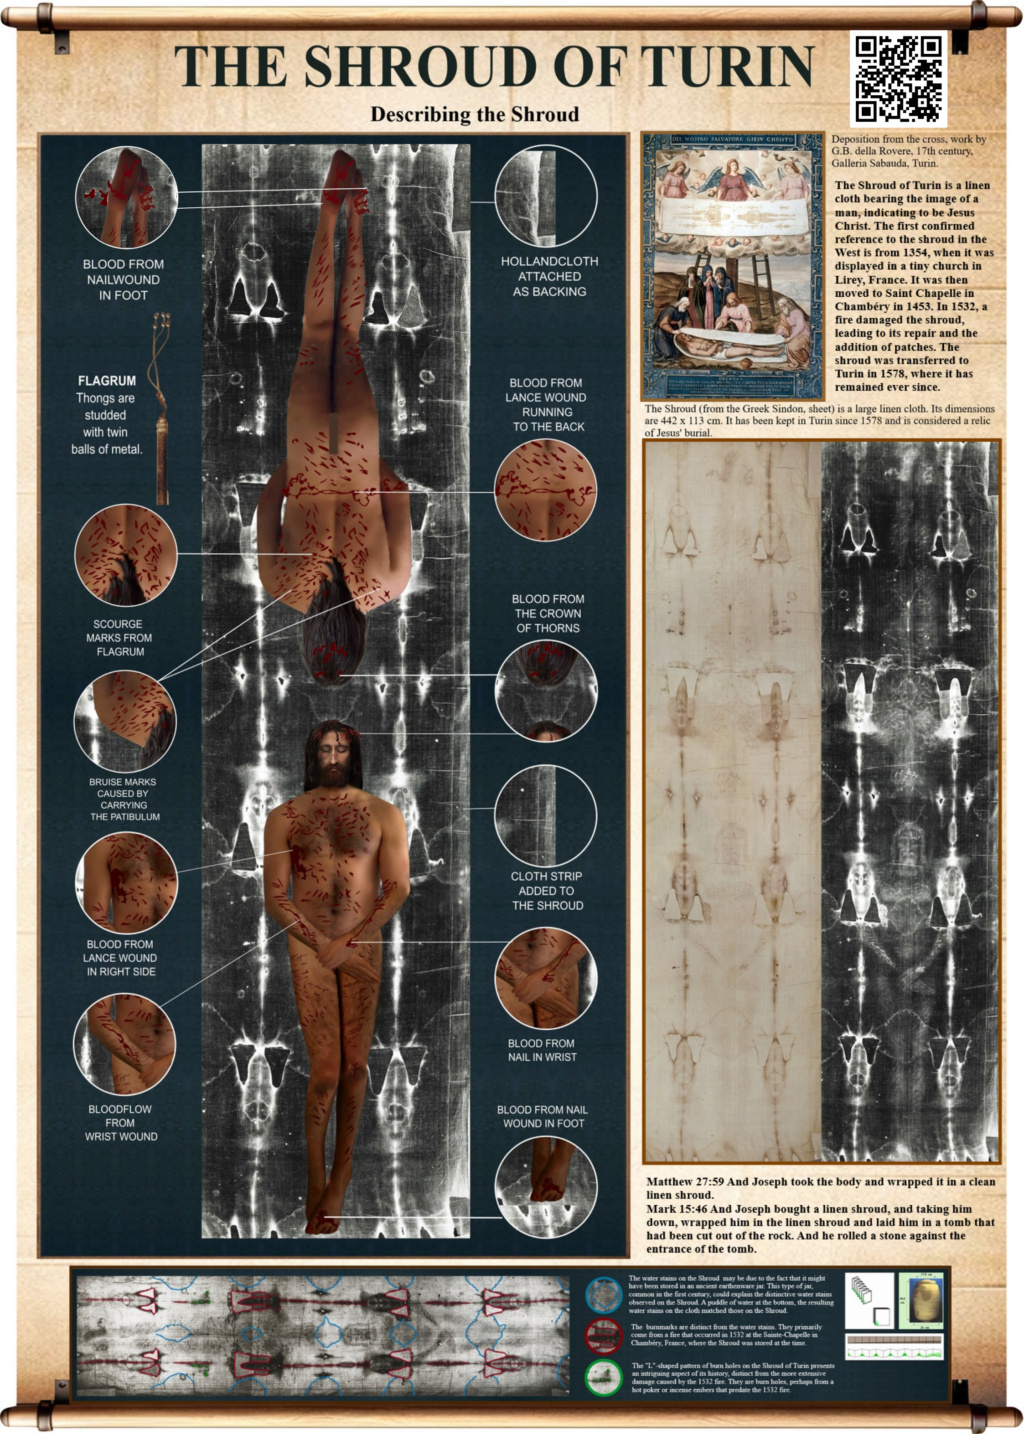 From Forensics to Faith: The Shroud of Turin's History and Authenticity Under Scrutiny Panel110